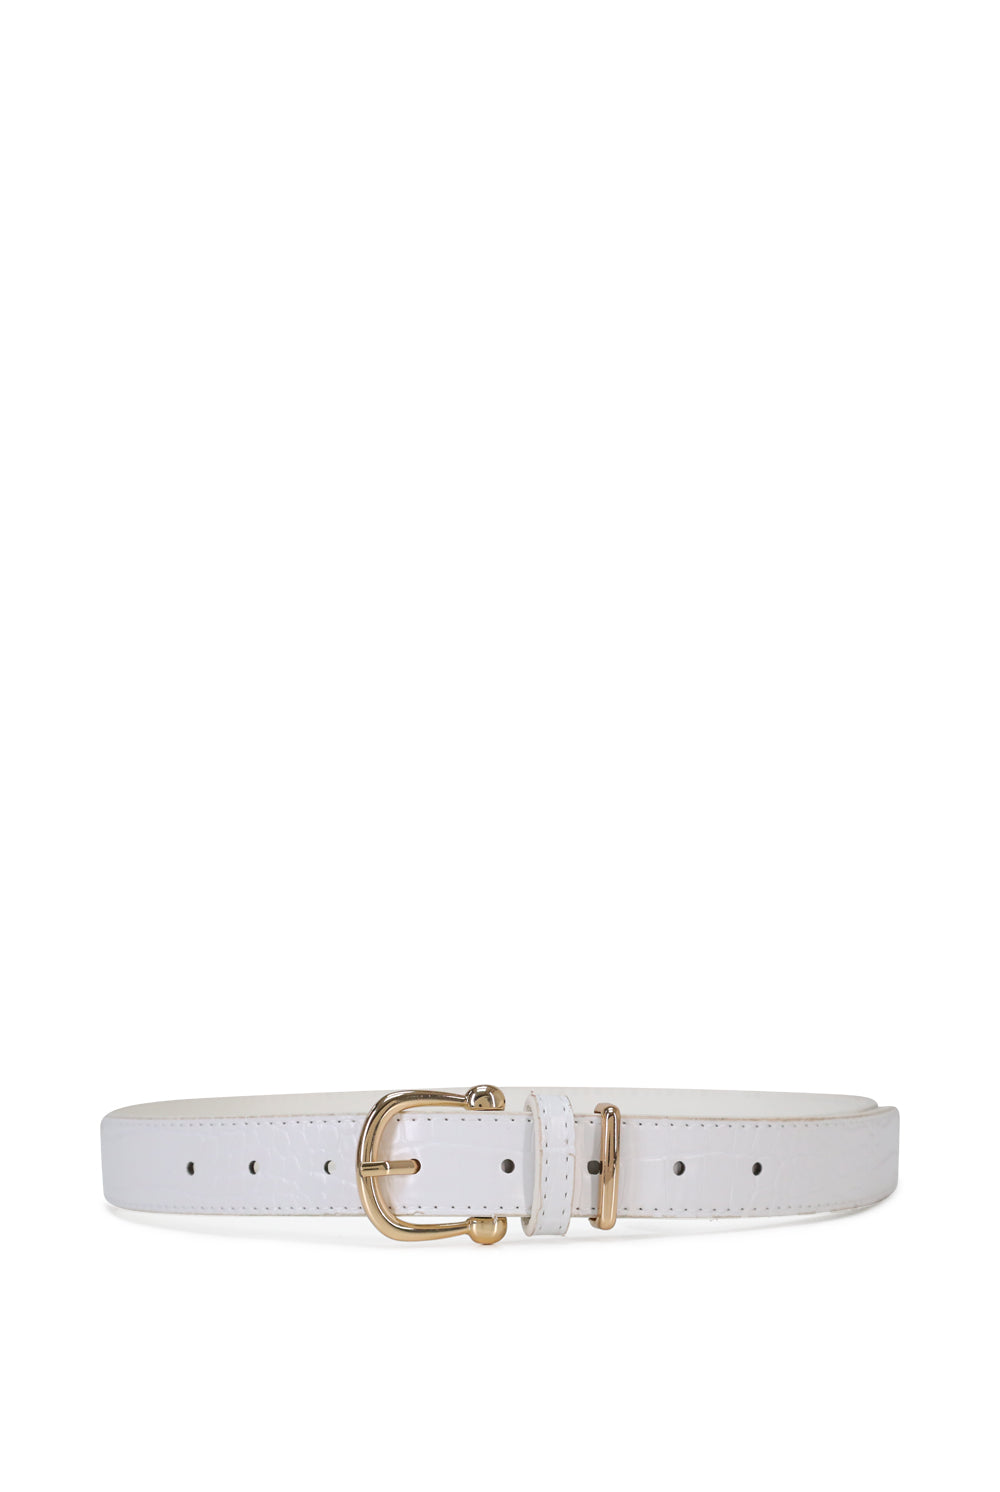 My Accessories London Minimal Croc Belt in White | Animal Print | Festival | Going out | Glam | Layering | Women's | Women's Accessories